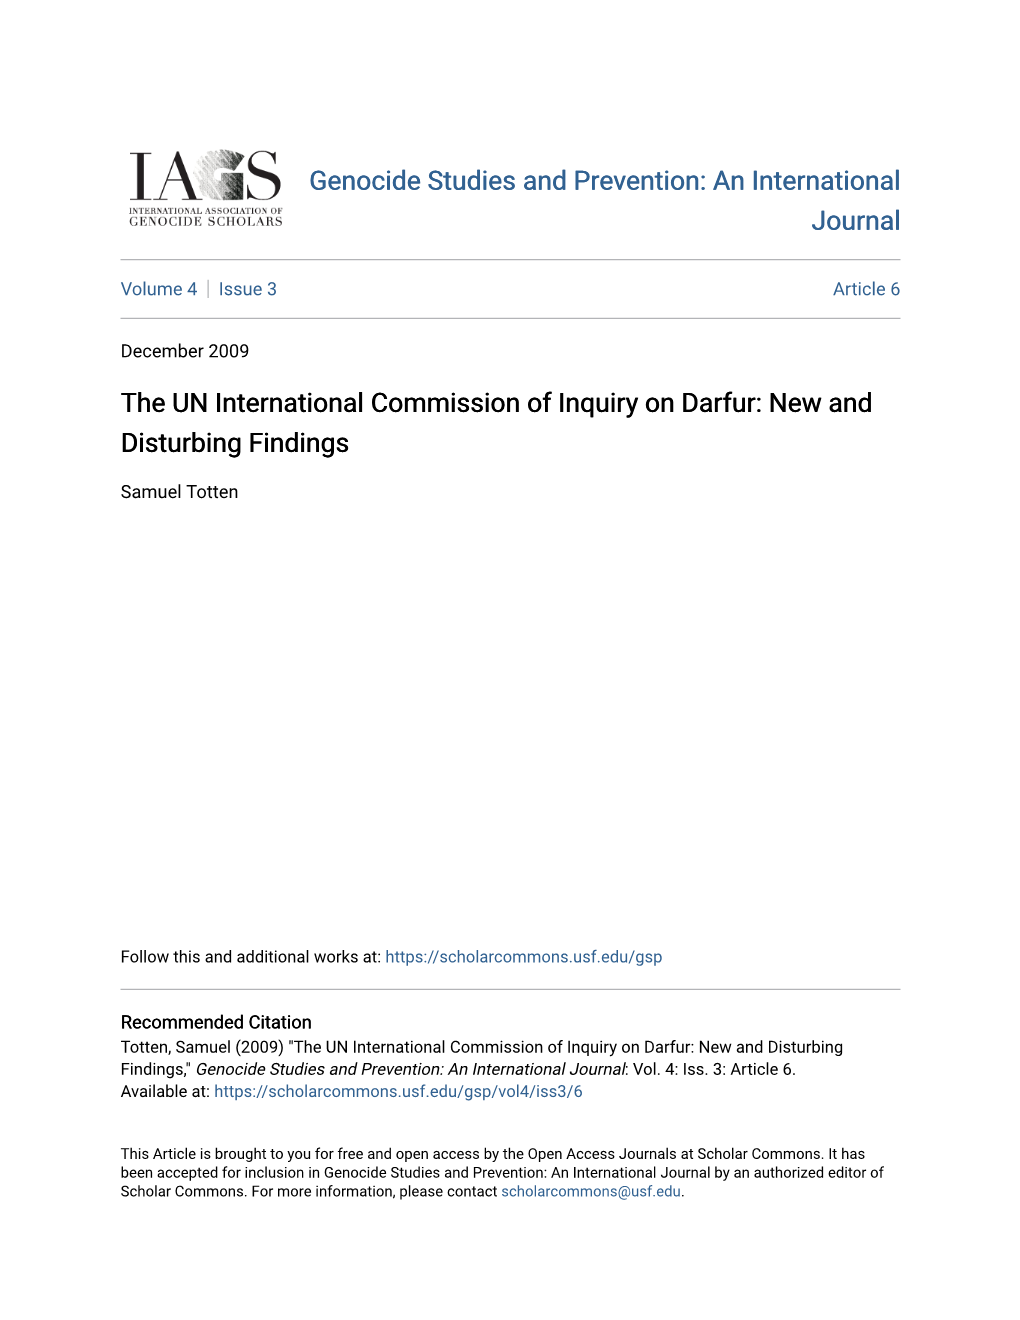 The UN International Commission of Inquiry on Darfur: New and Disturbing Findings